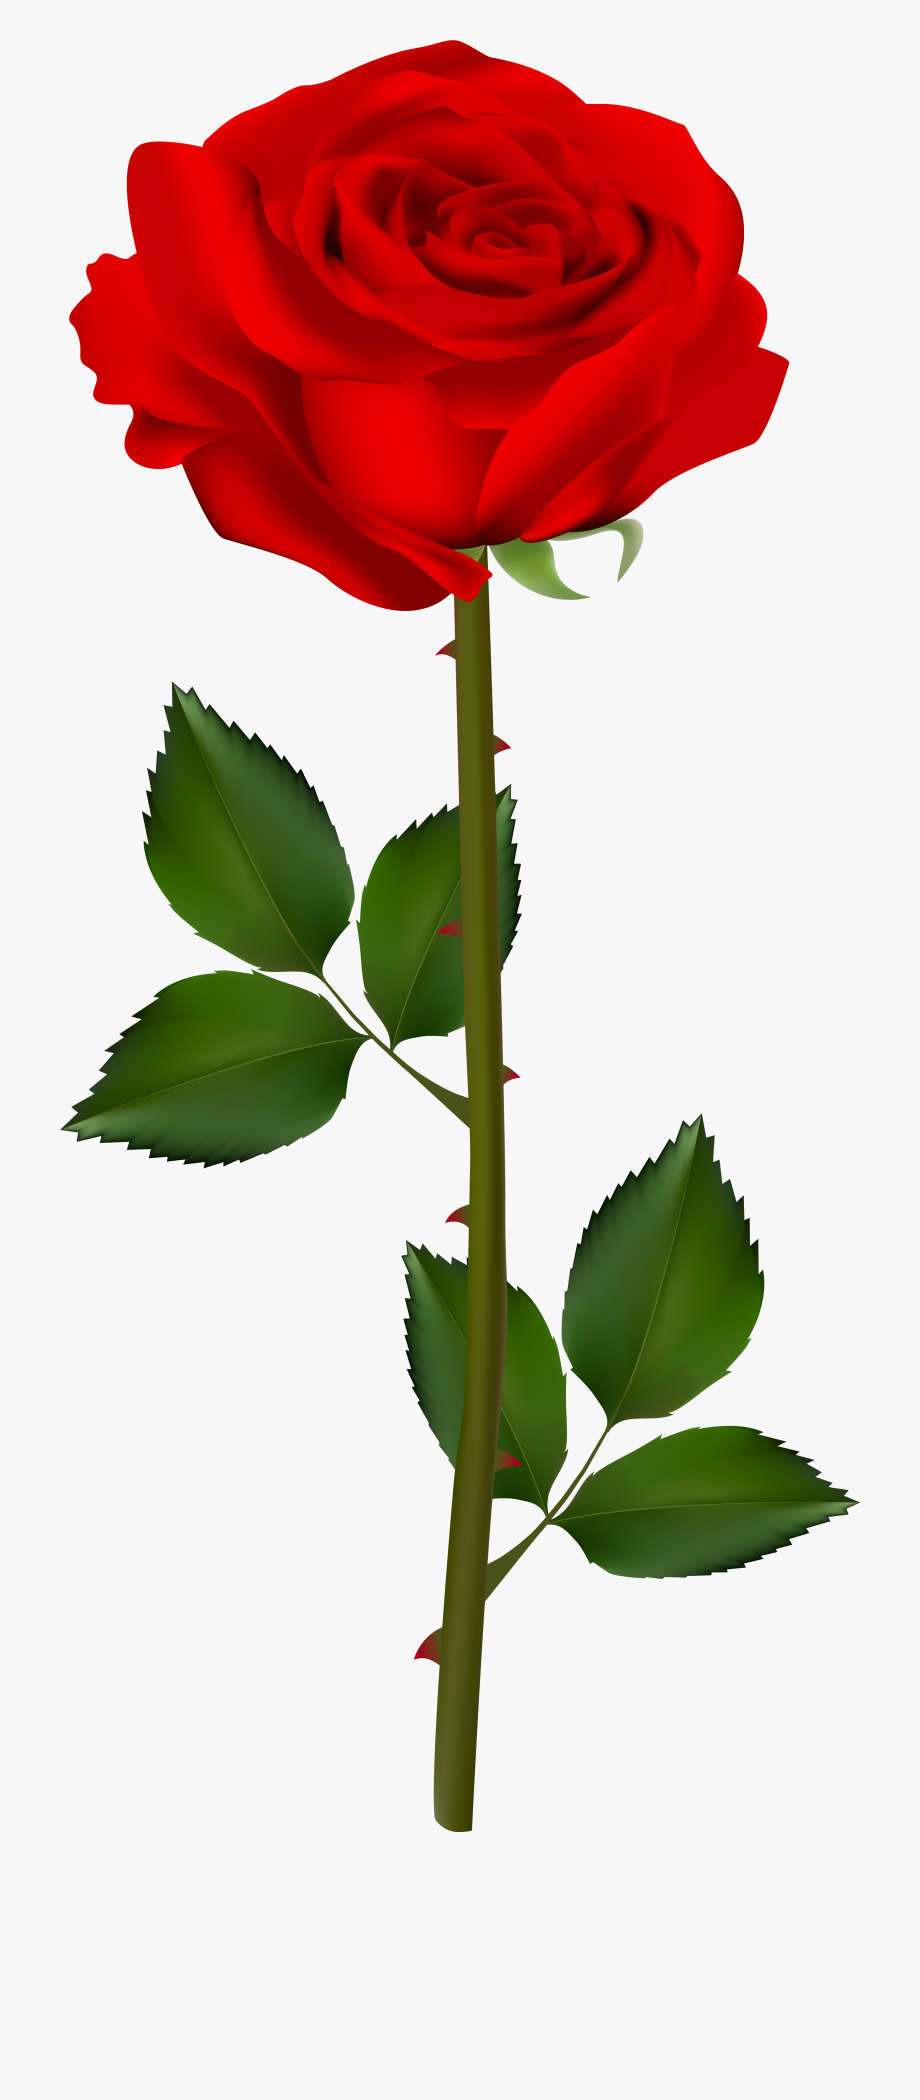 At getdrawings red with. Clipart rose garden rose